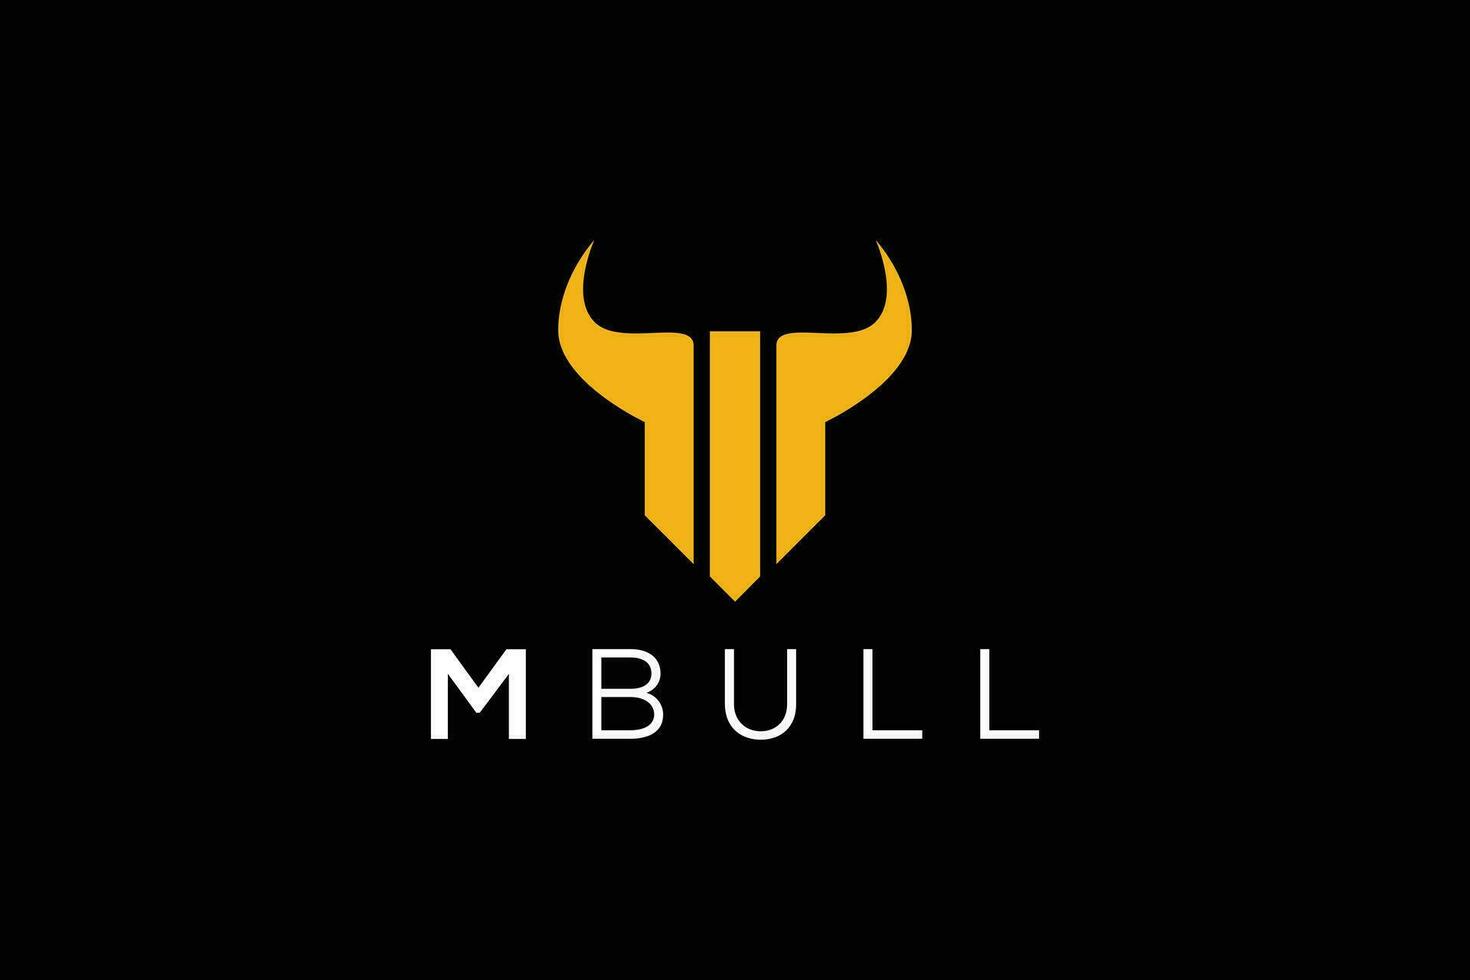 Trendy and Professional letter M bull head logo design vector template